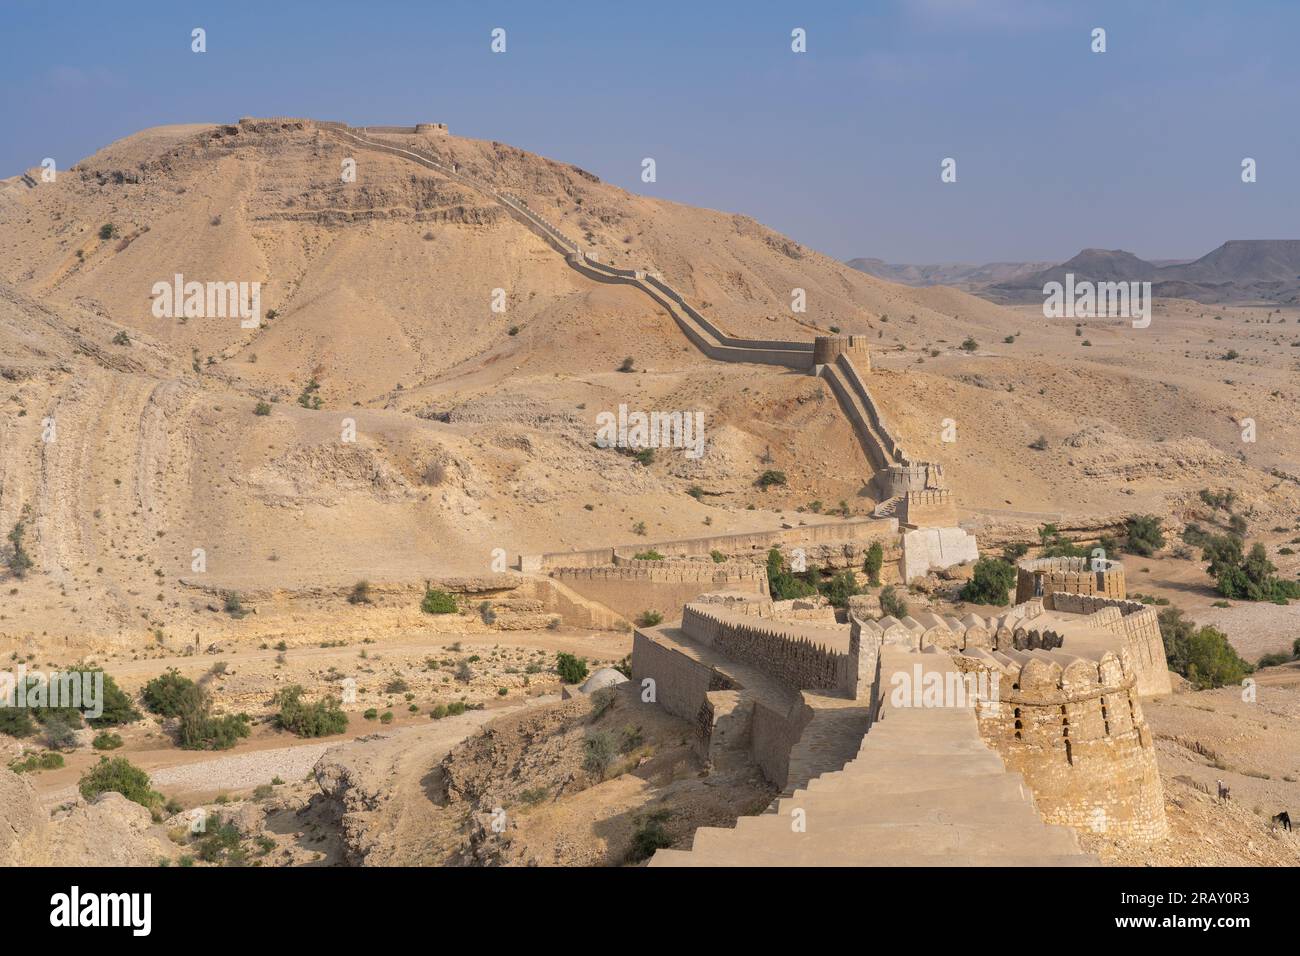 Desert landscape view from Sann gate of ancient Ranikot fort known as the great wall of Sindh in Jamshoro, Sindh, Pakistan Stock Photo